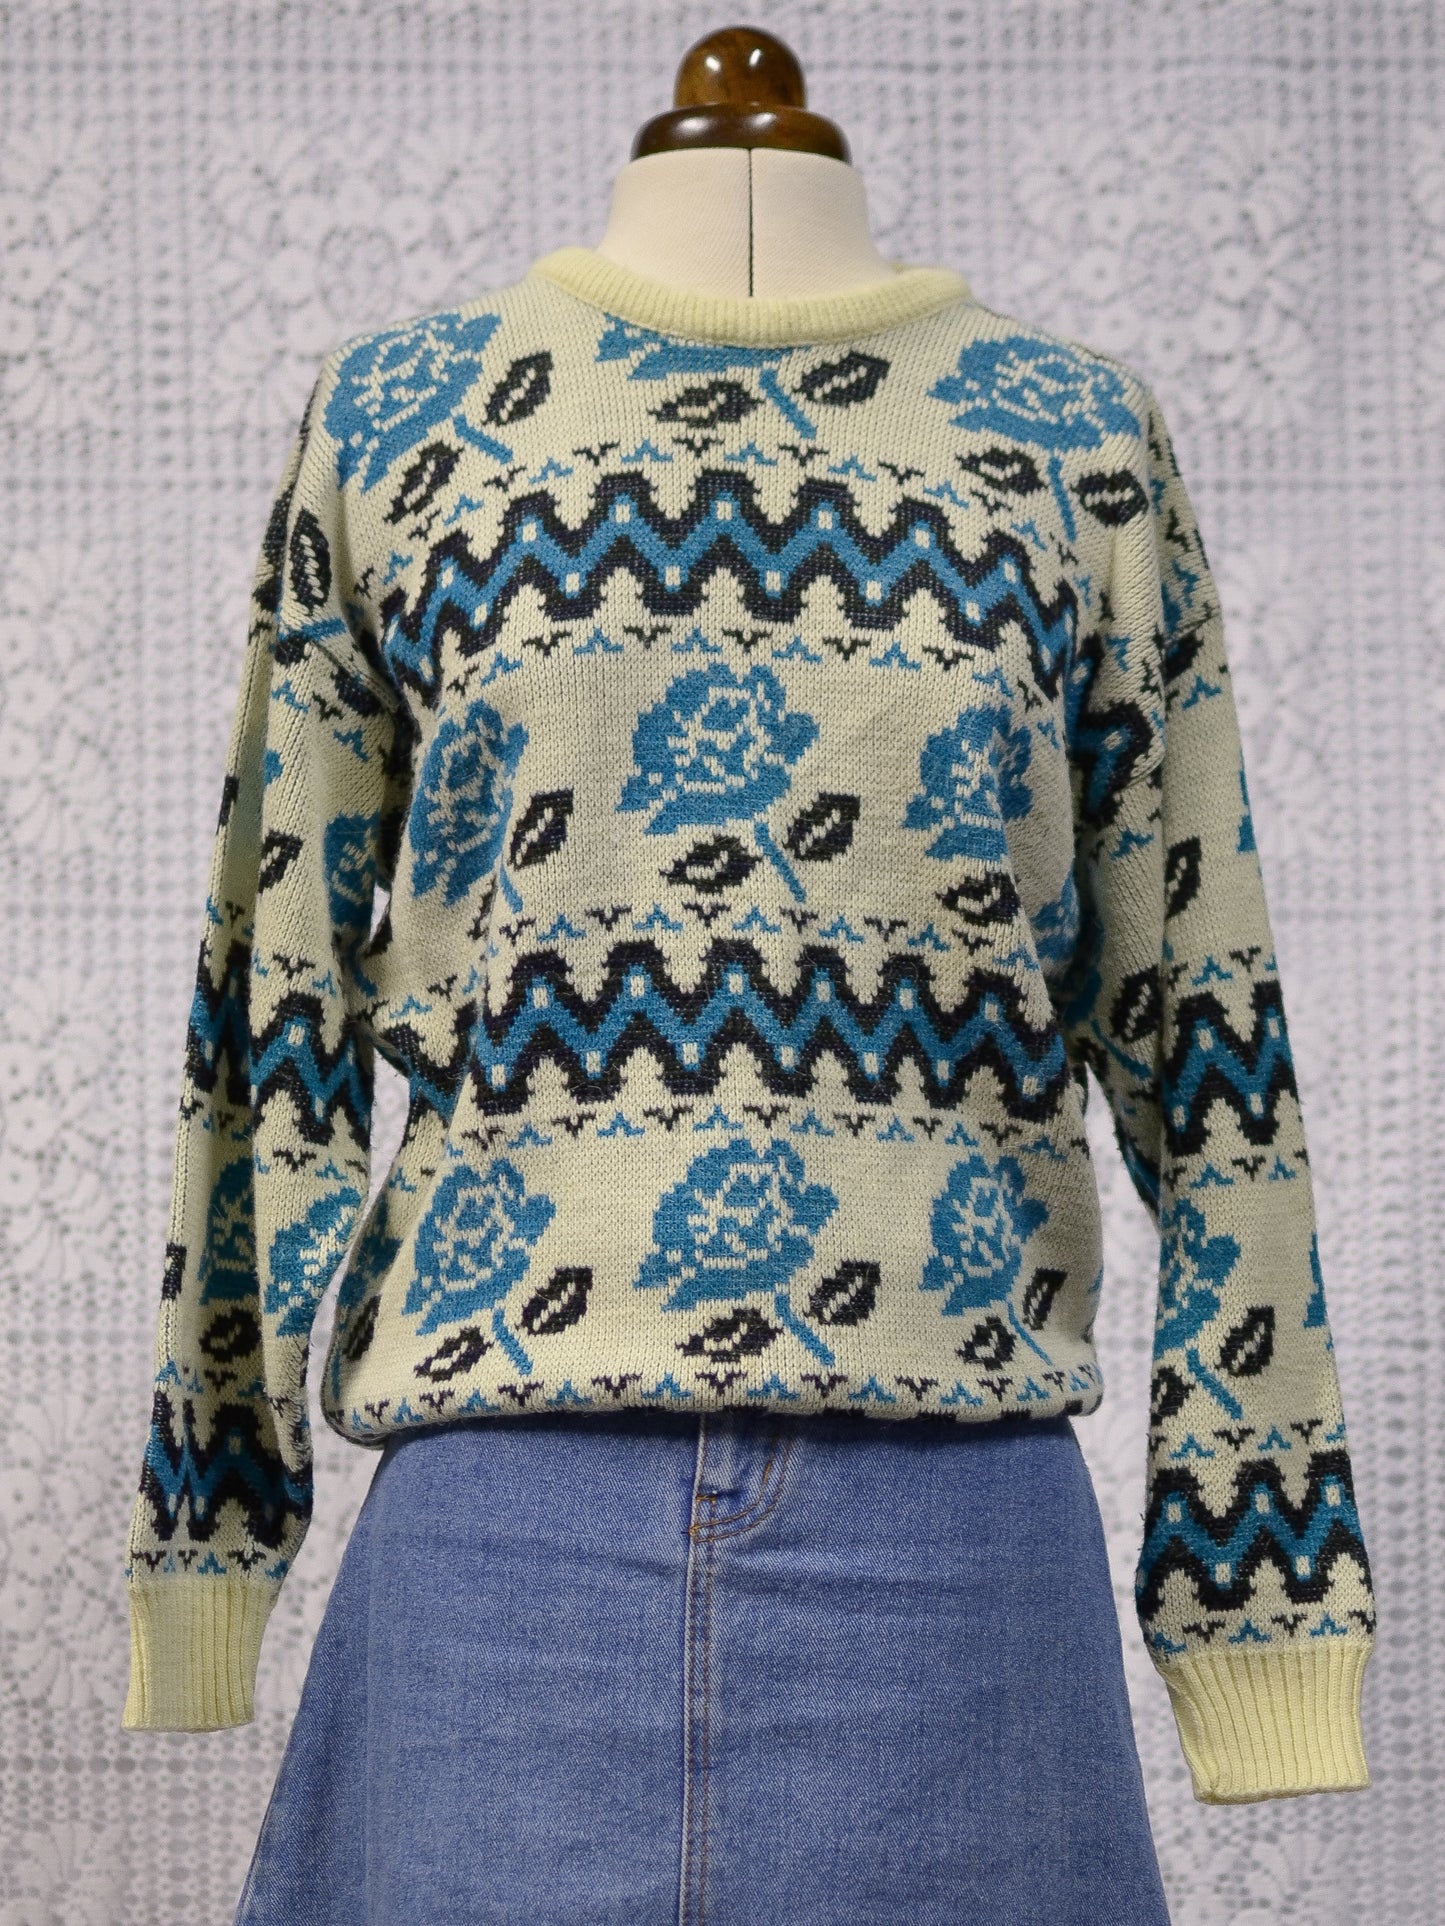 1980s cream, teal and black rose pattern zigzag jumper